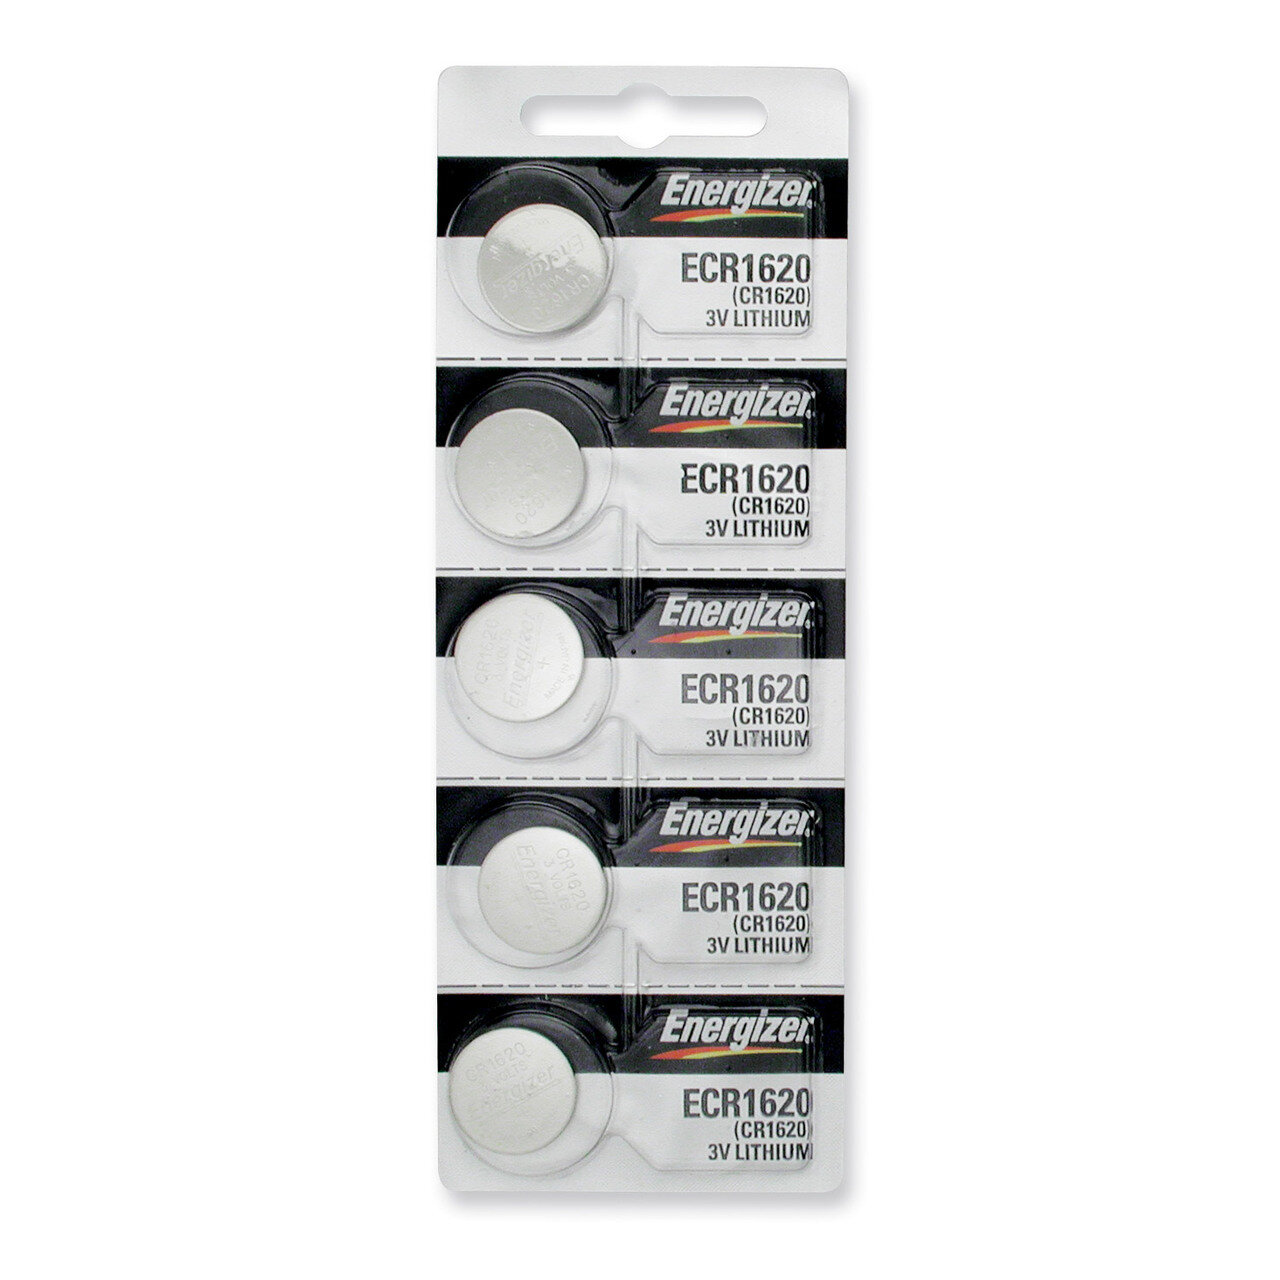 Energizer Lithium Batteries Package of 5 WB1620